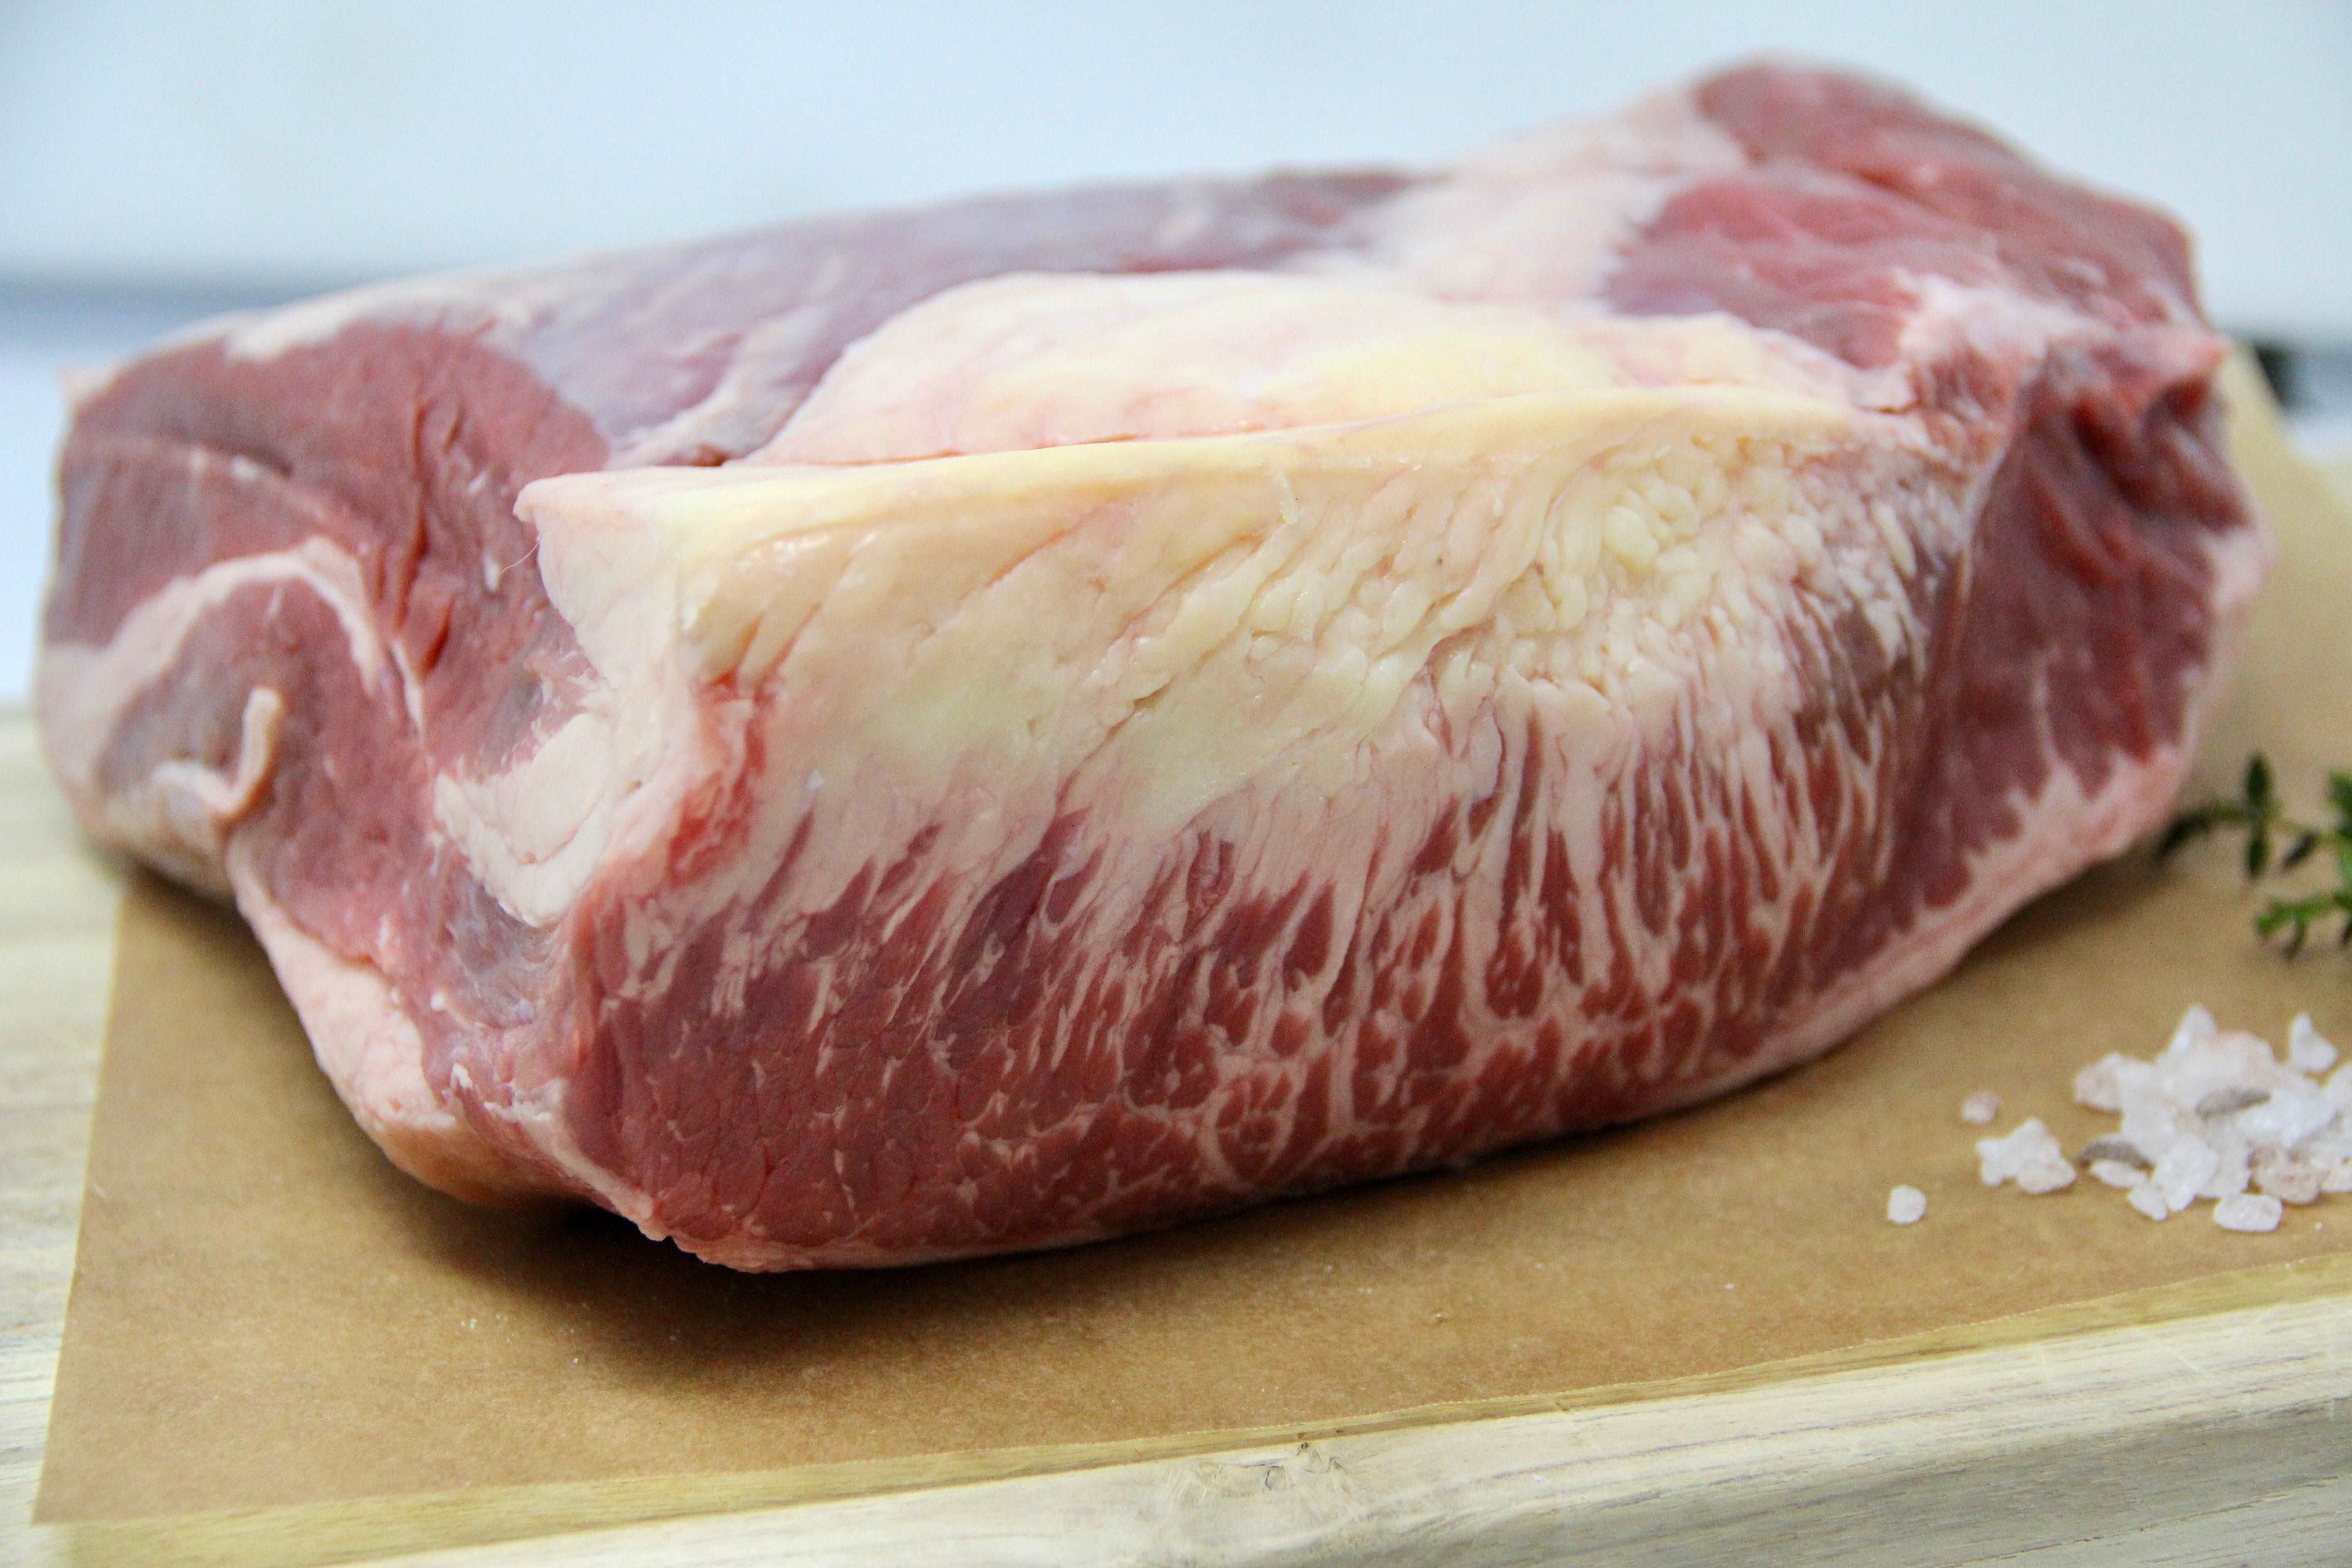 100% Grass-Fed Beef (Wagyu-Angus) Brisket Uncooked Regenerative Farm Products Delivered Apsey Farms Midwest USA